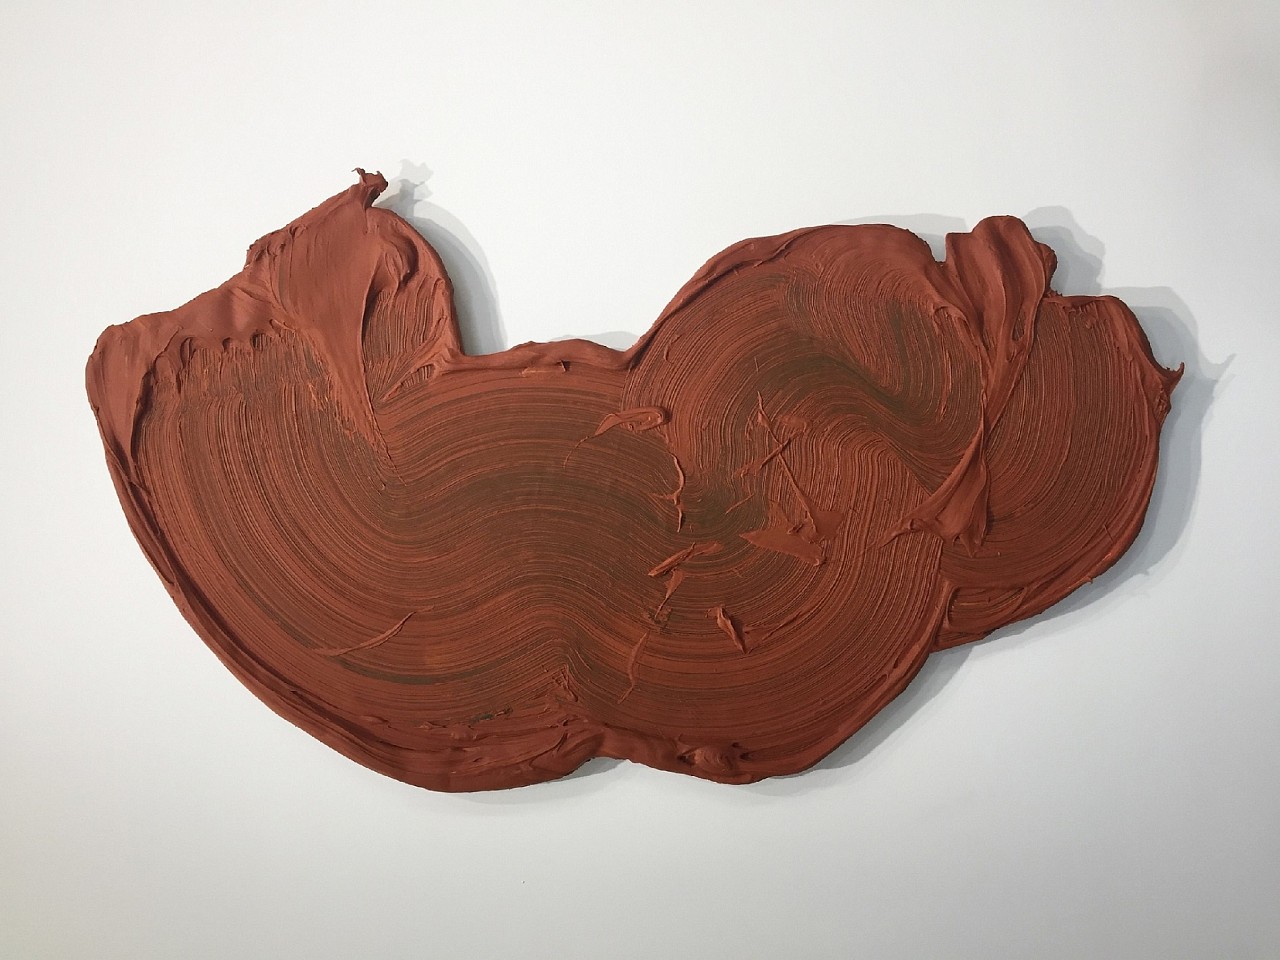 Donald Martiny, Desna, 2017
polymer and pigment on aluminum, 58 x 35 in.
MART00098